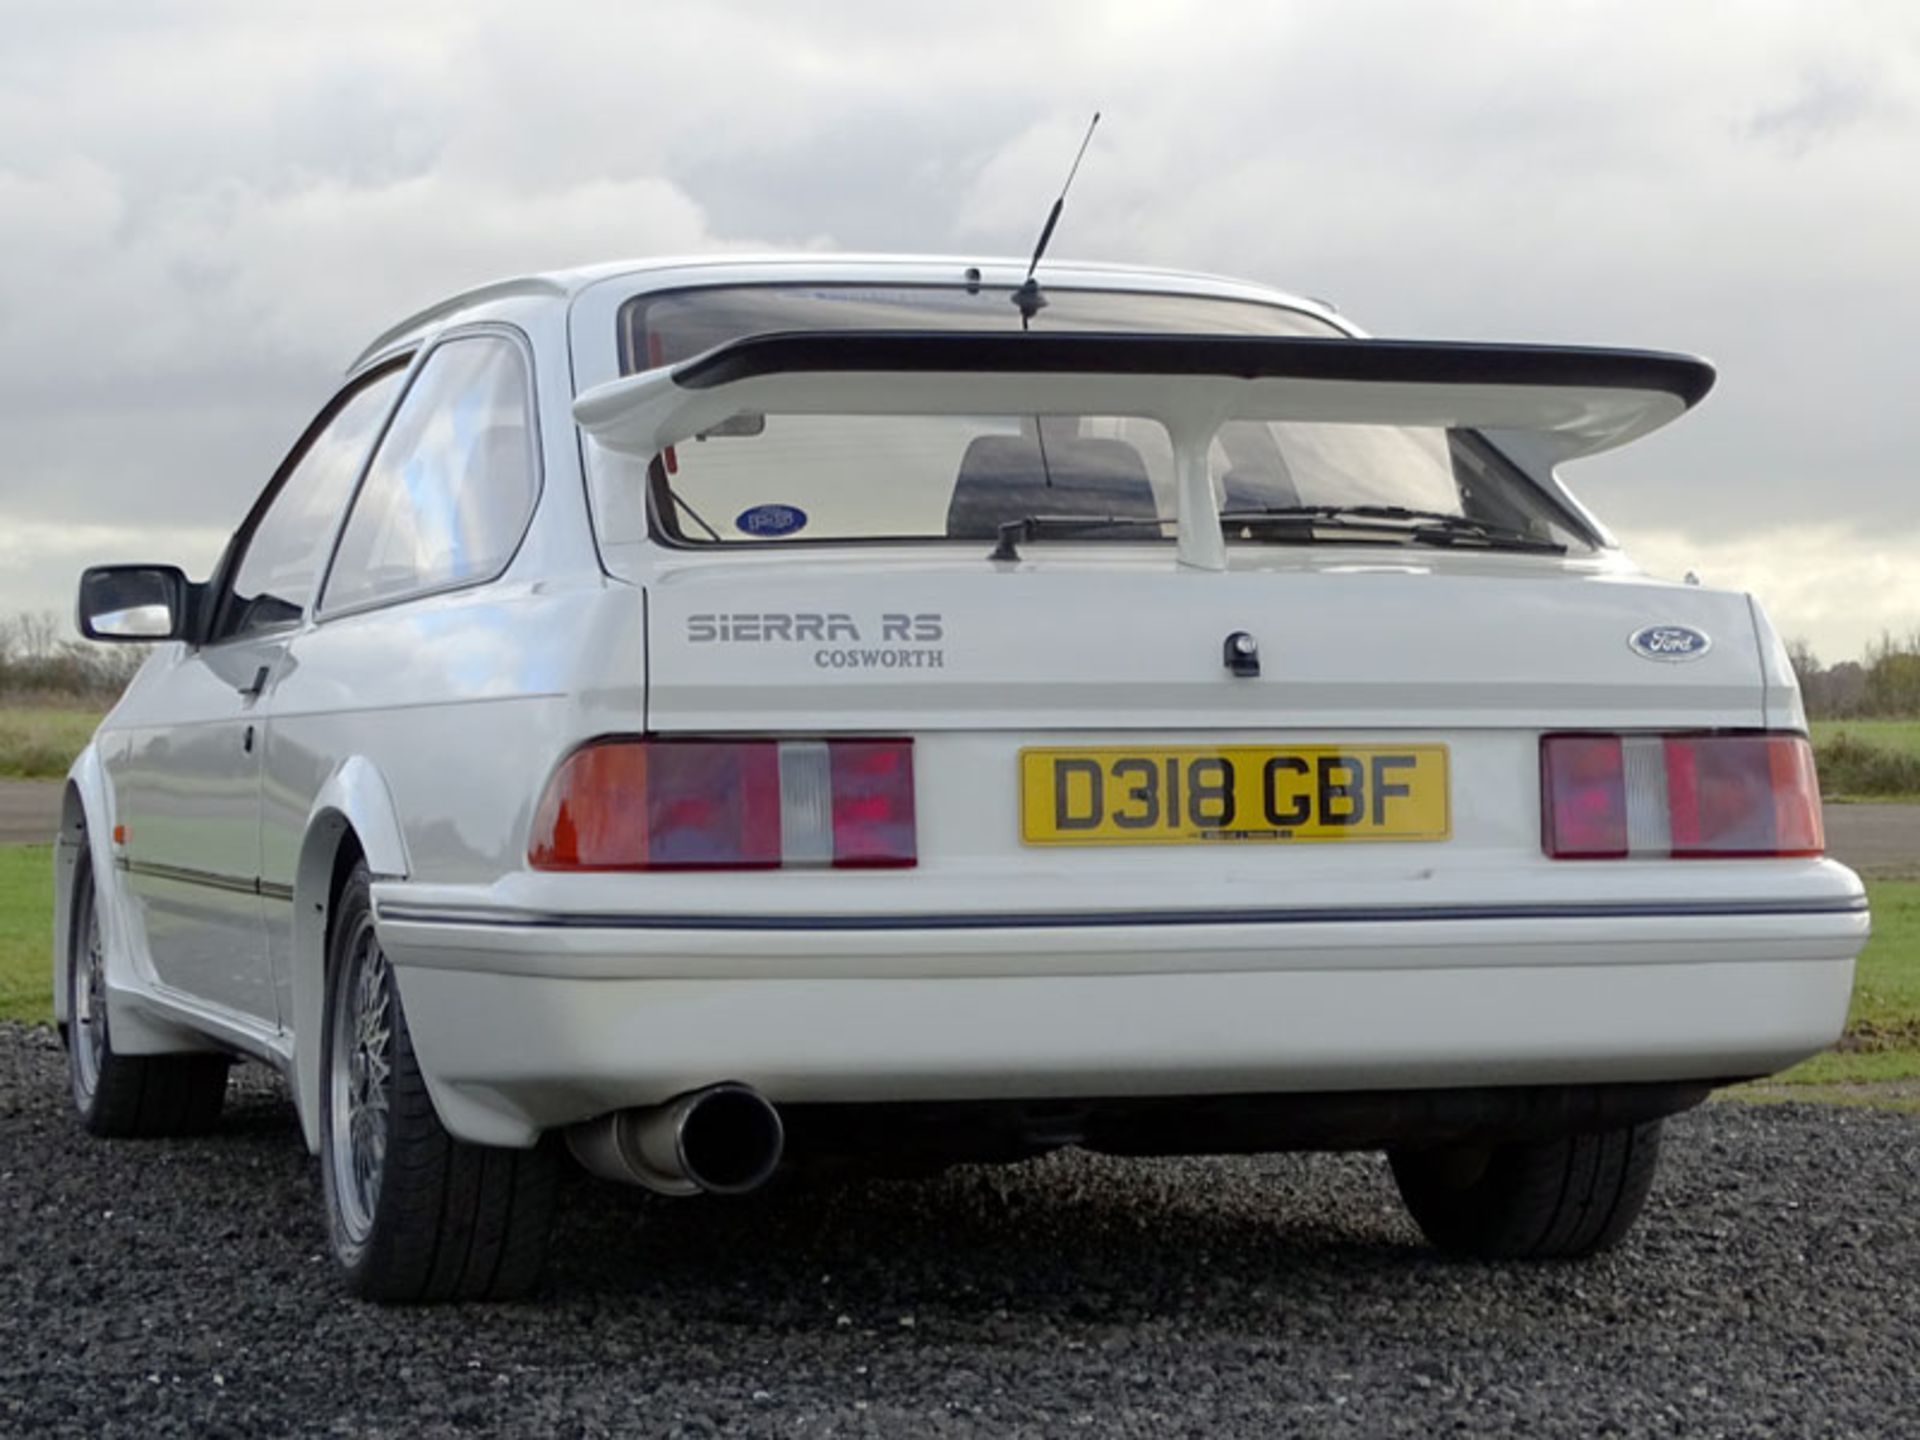 1987 Ford Sierra RS Cosworth - Image 5 of 11